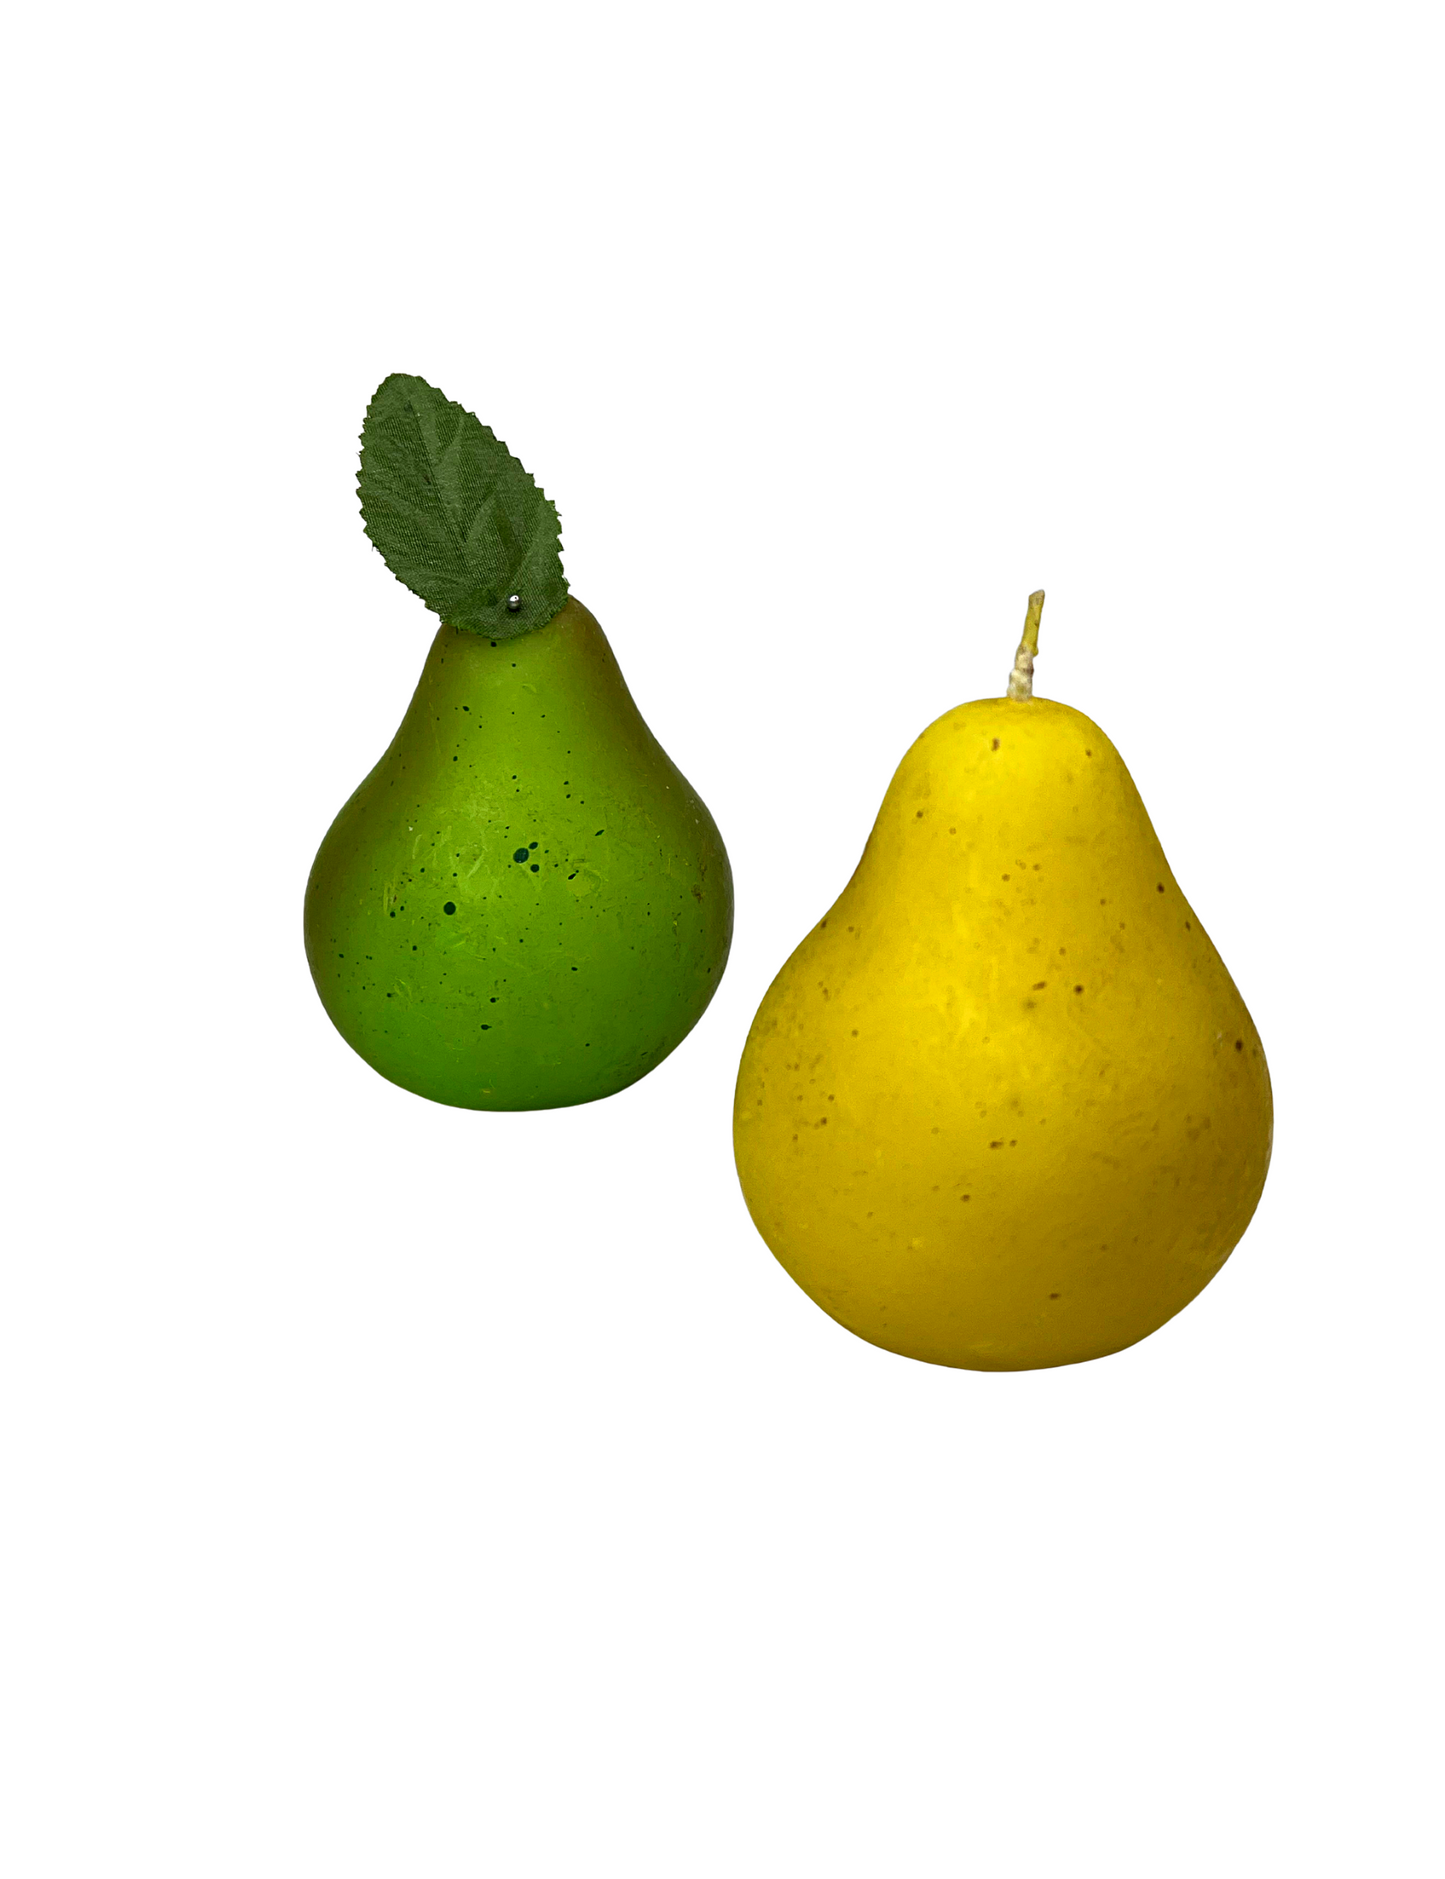 90’s Pair of Pears Fruit Food Shaped Candles 3.5” x 3”